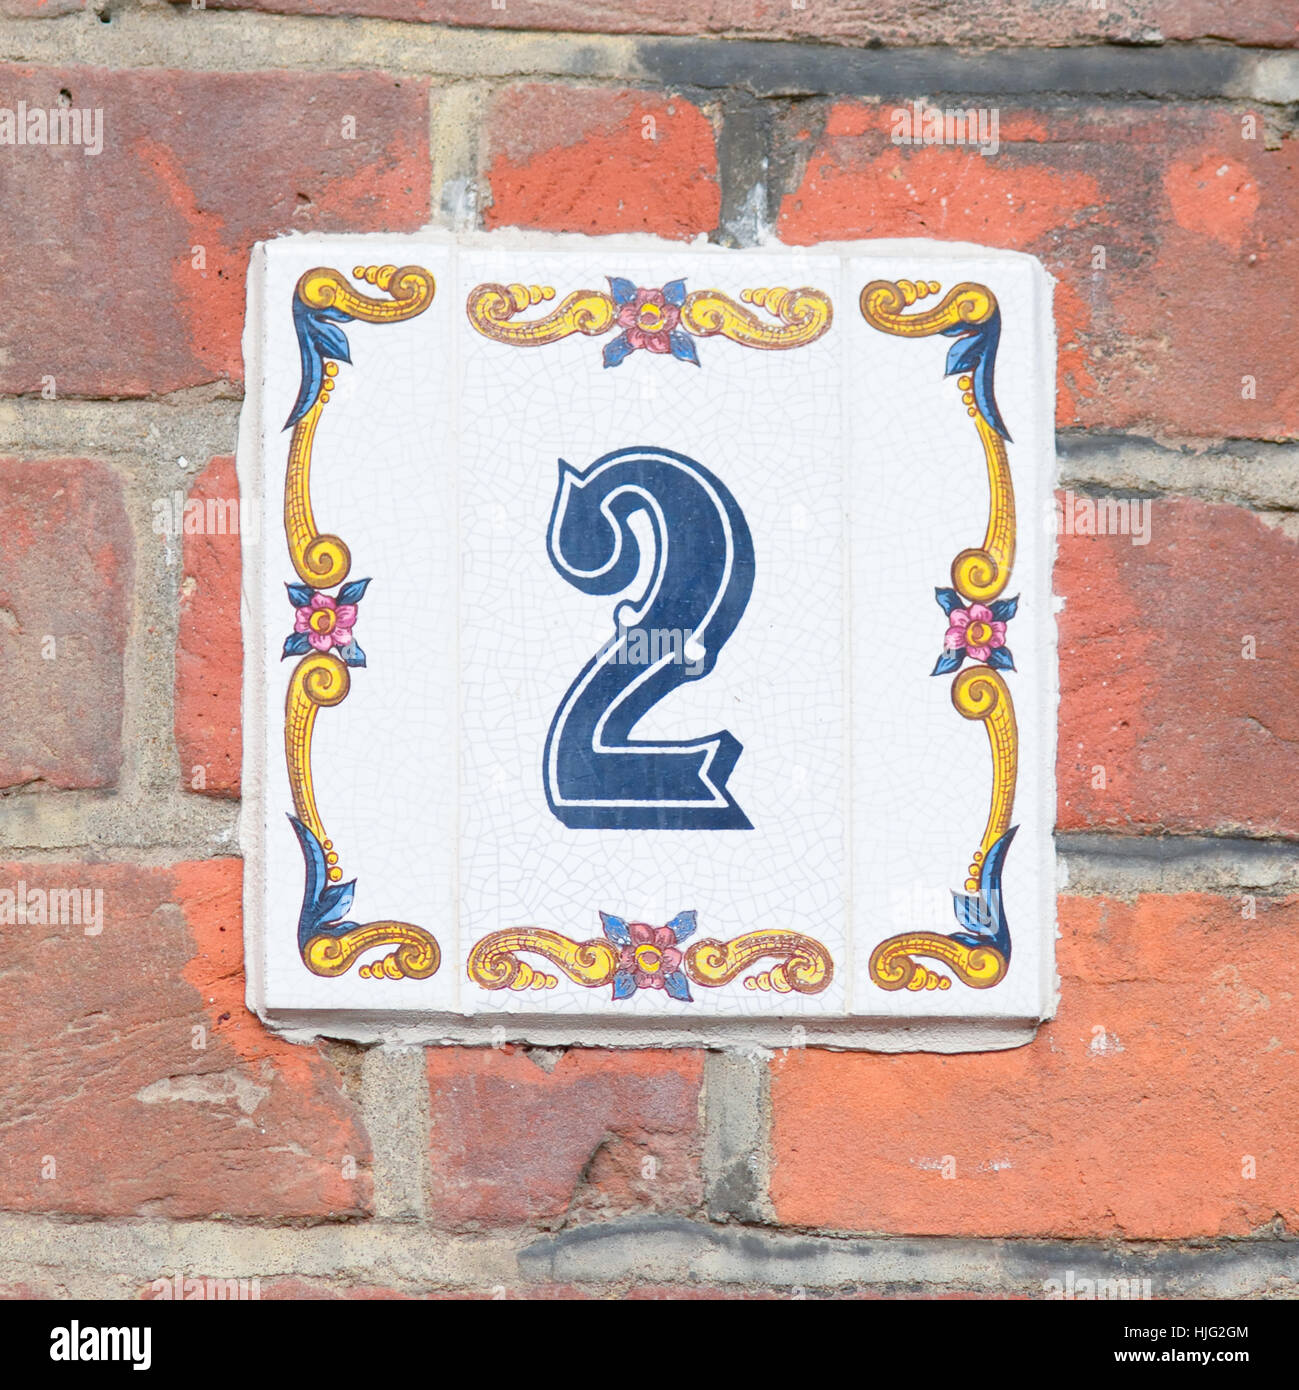 House number 2 sign on ceramic tile Stock Photo